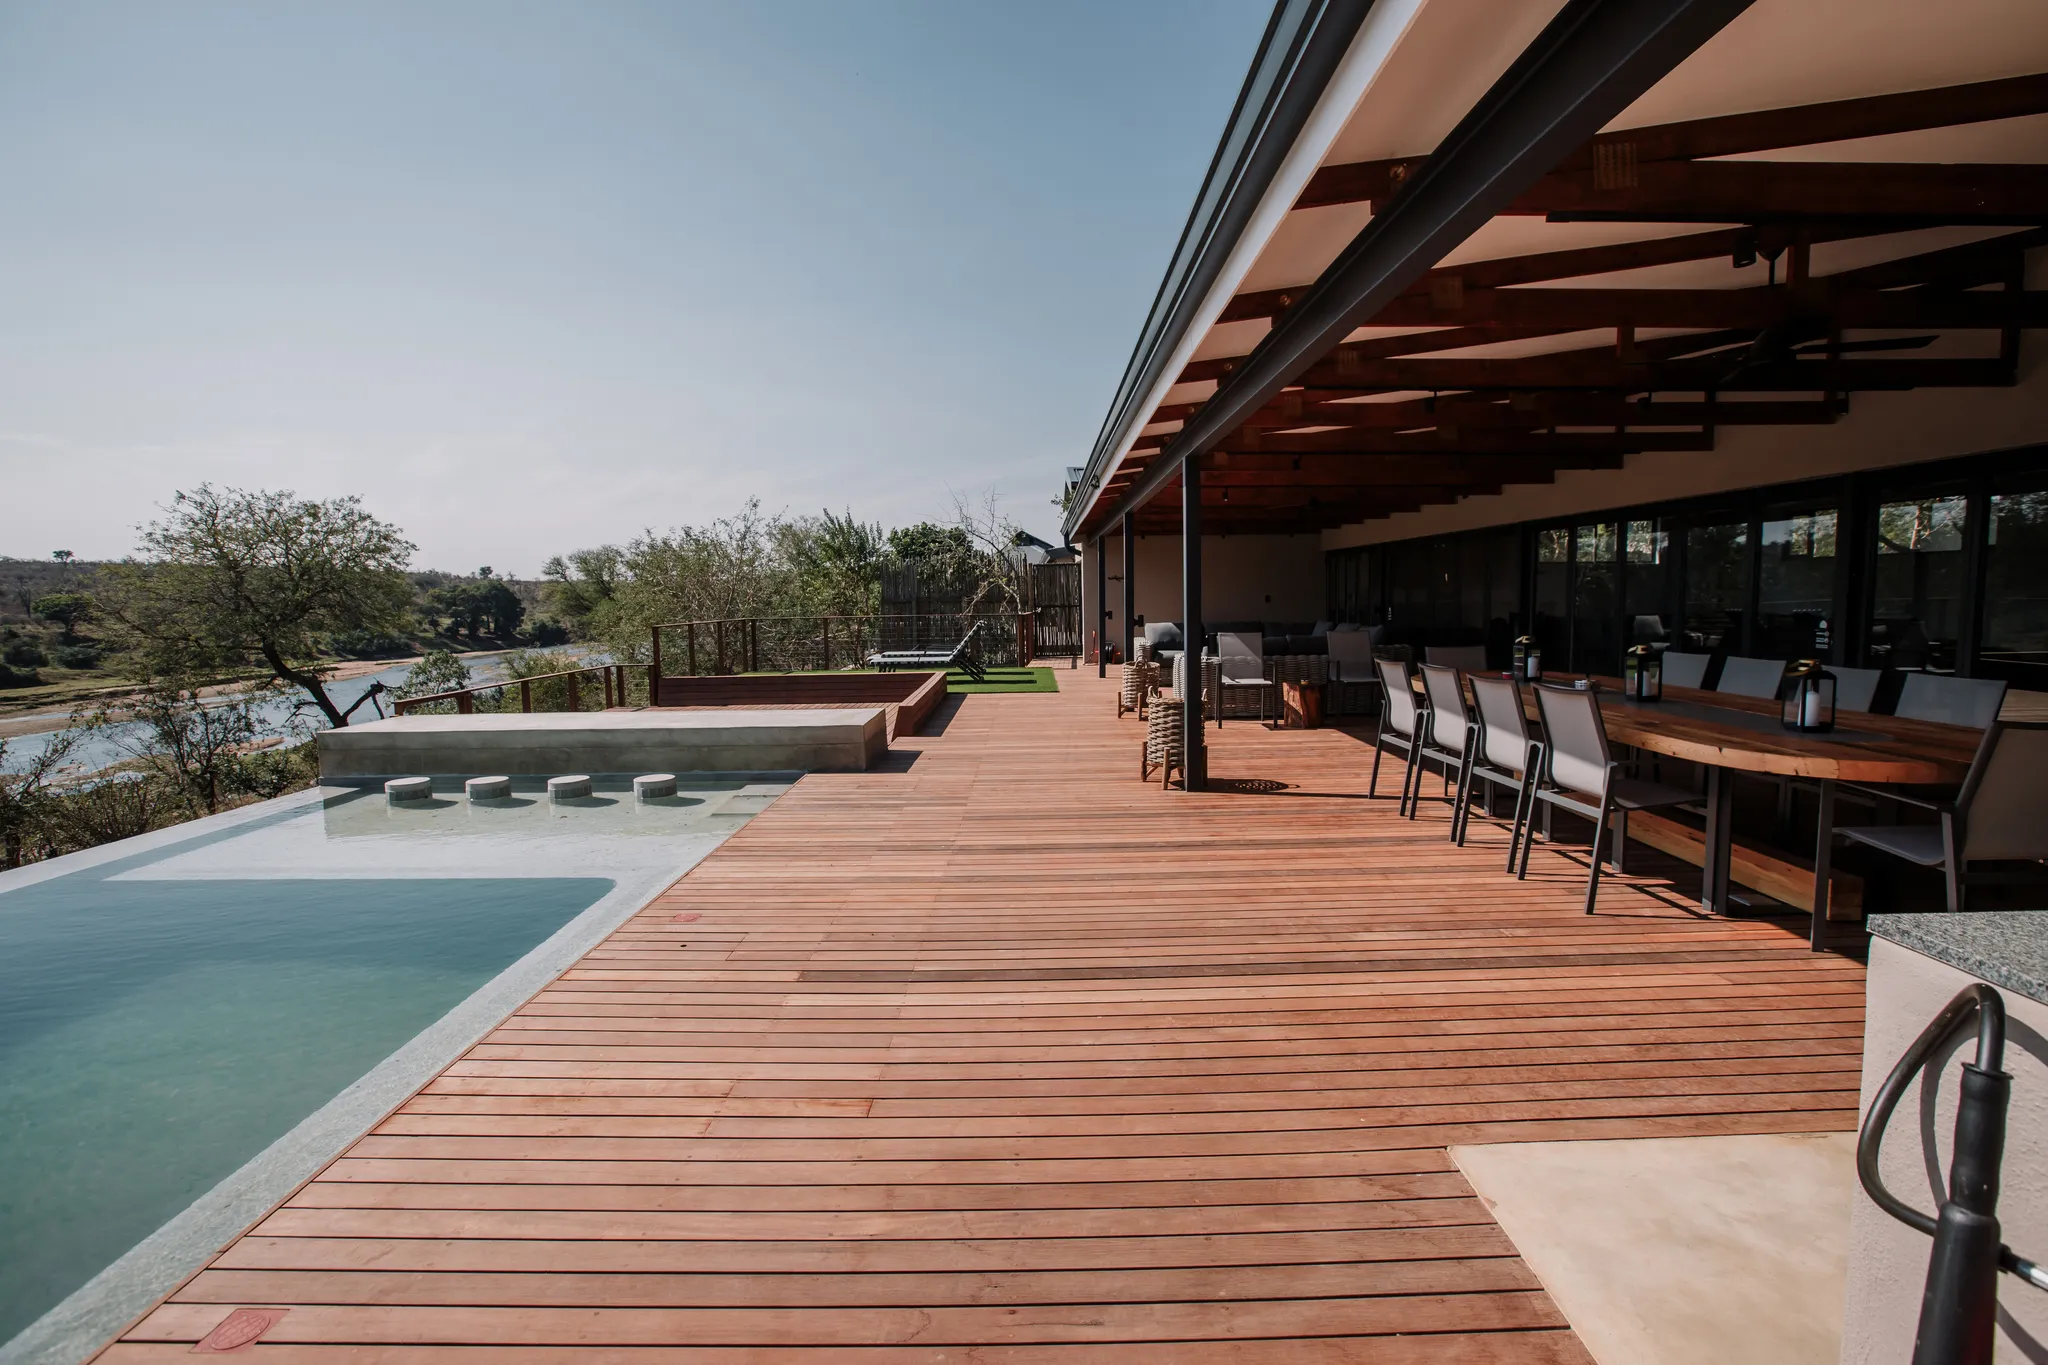 View of the pool area and covered patio with outdoor furniture.